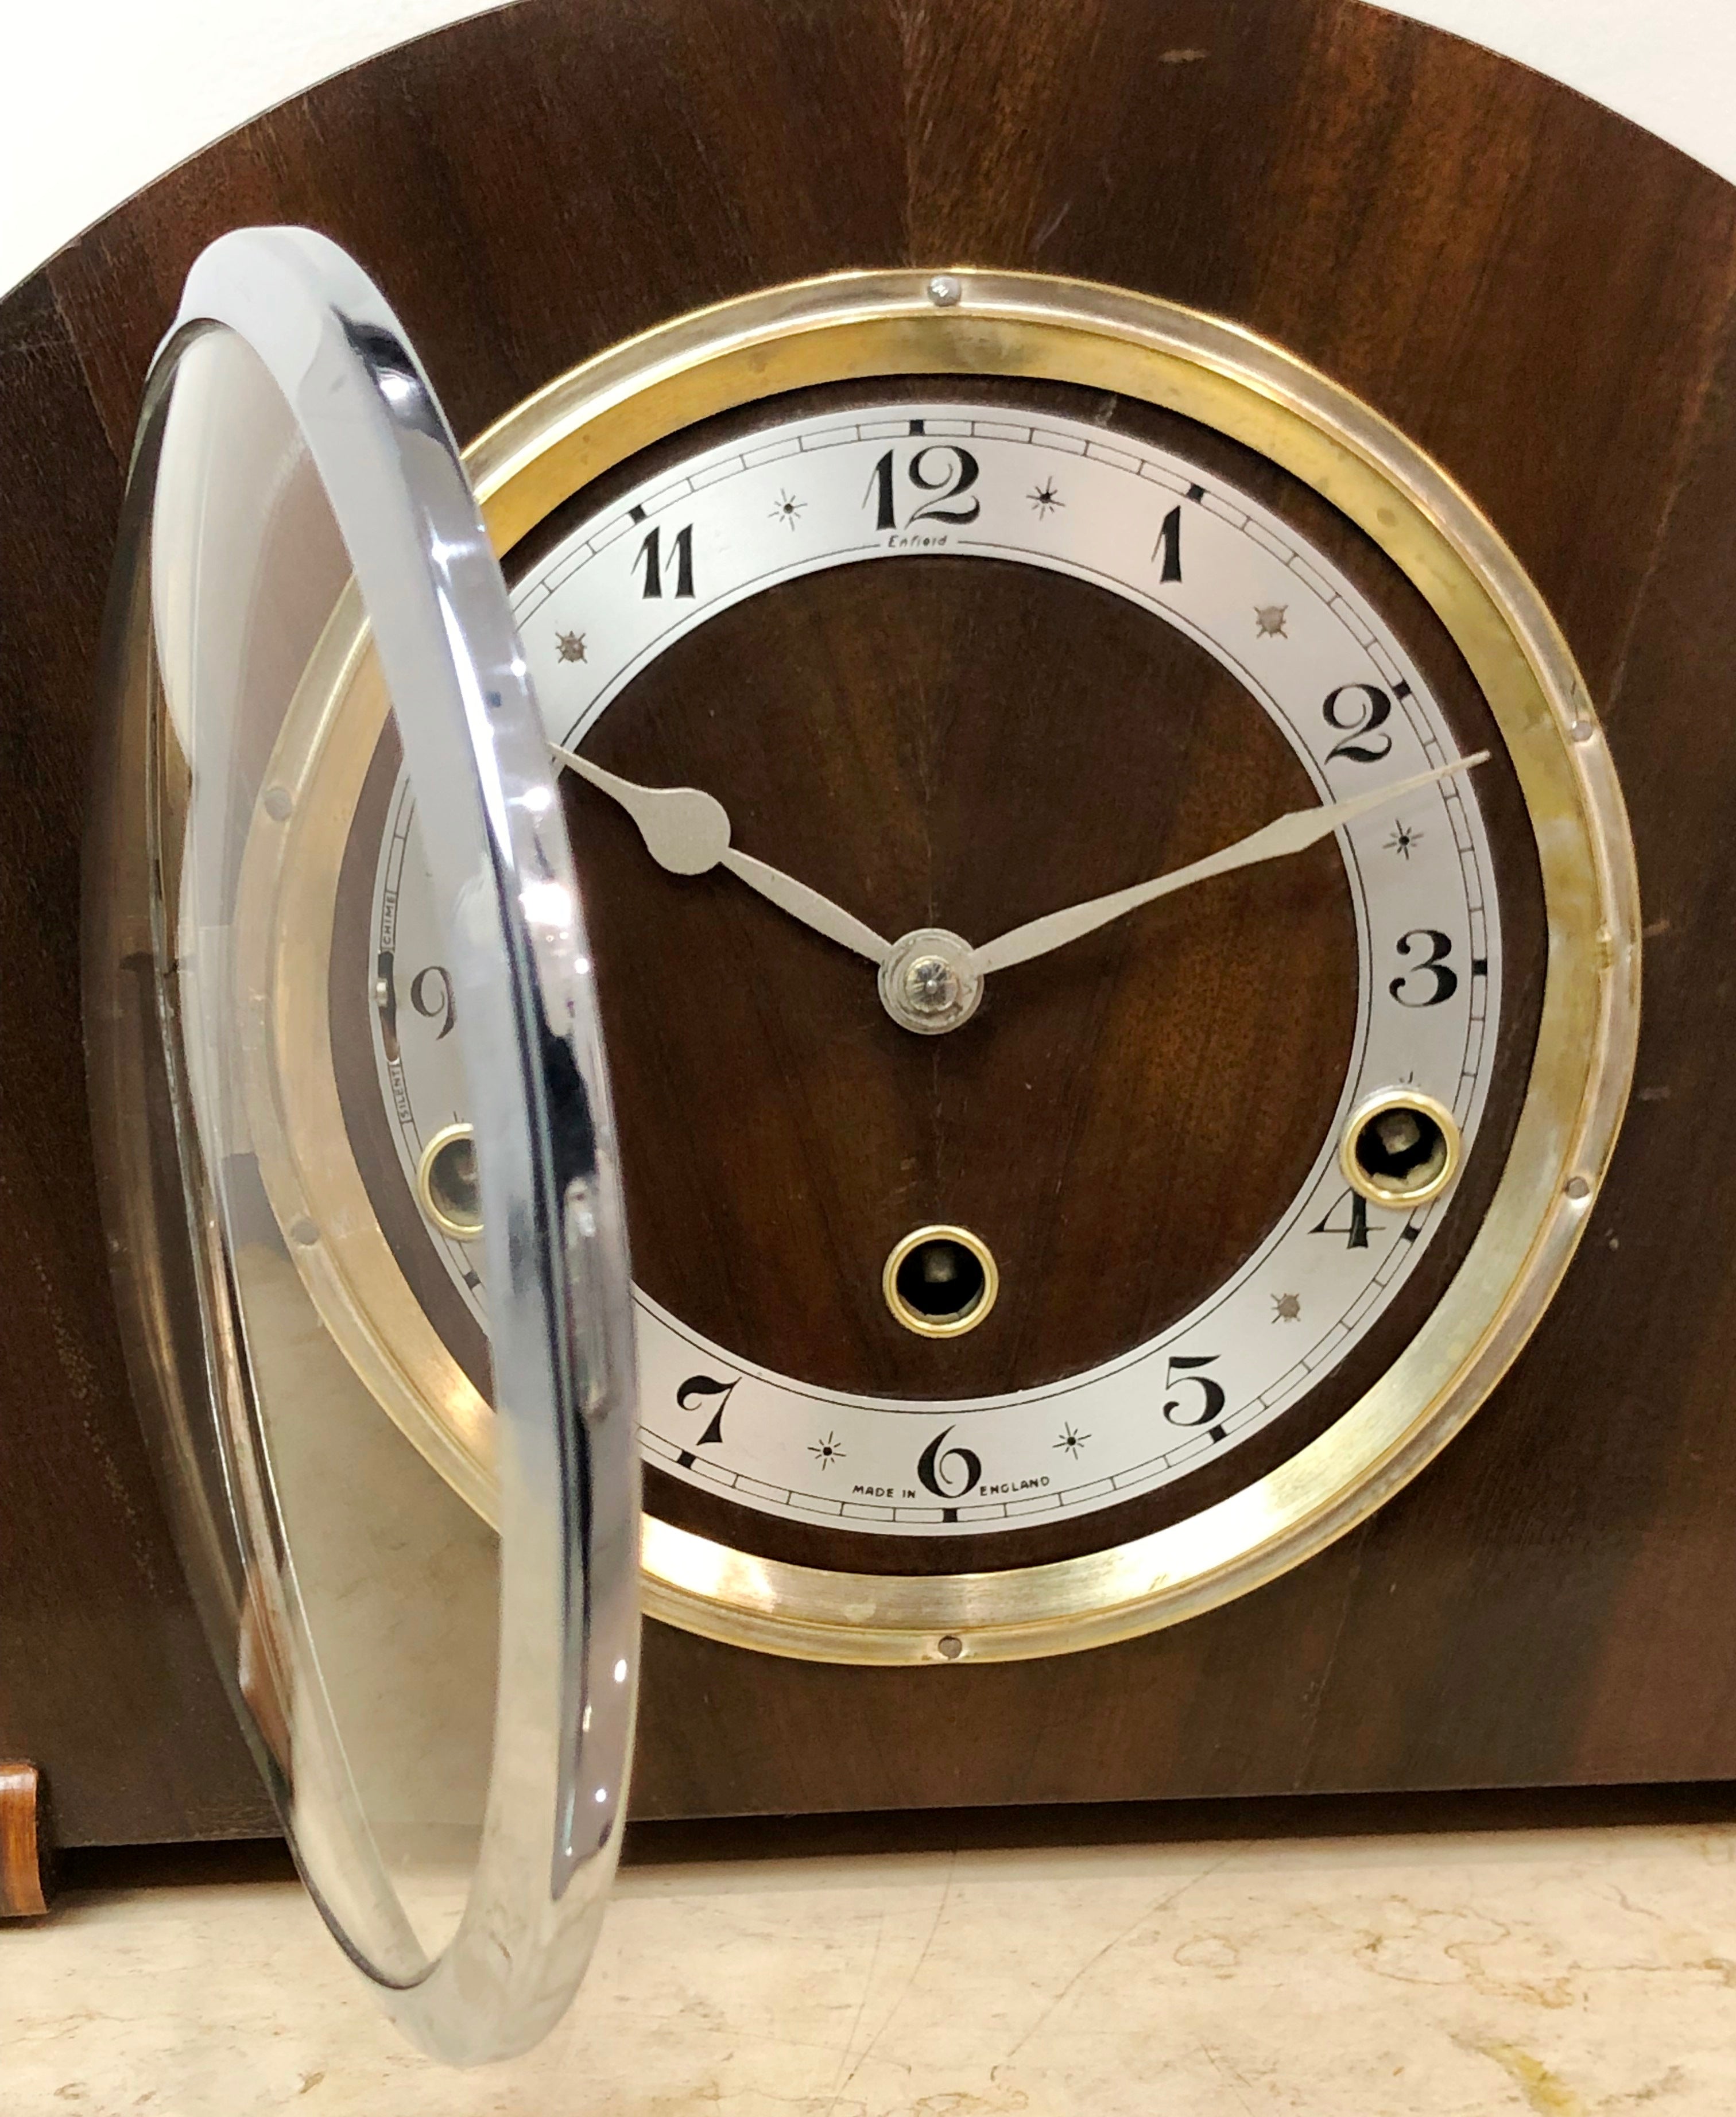 Vintage Enfield Westminster Chime Mantel Clock | eXibit collection